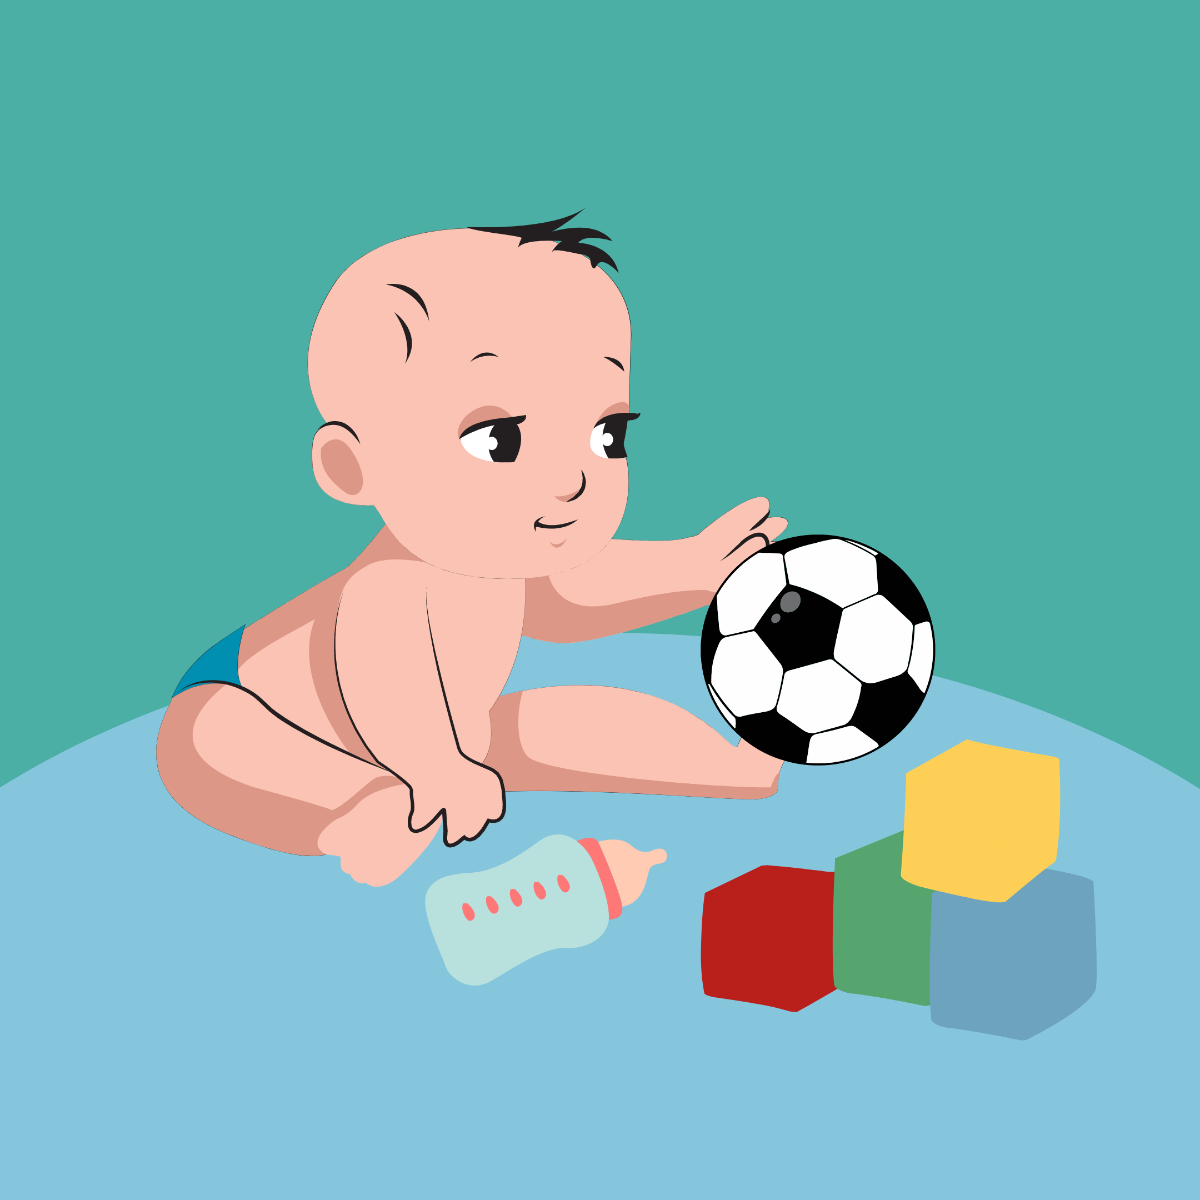 Baby Image Template